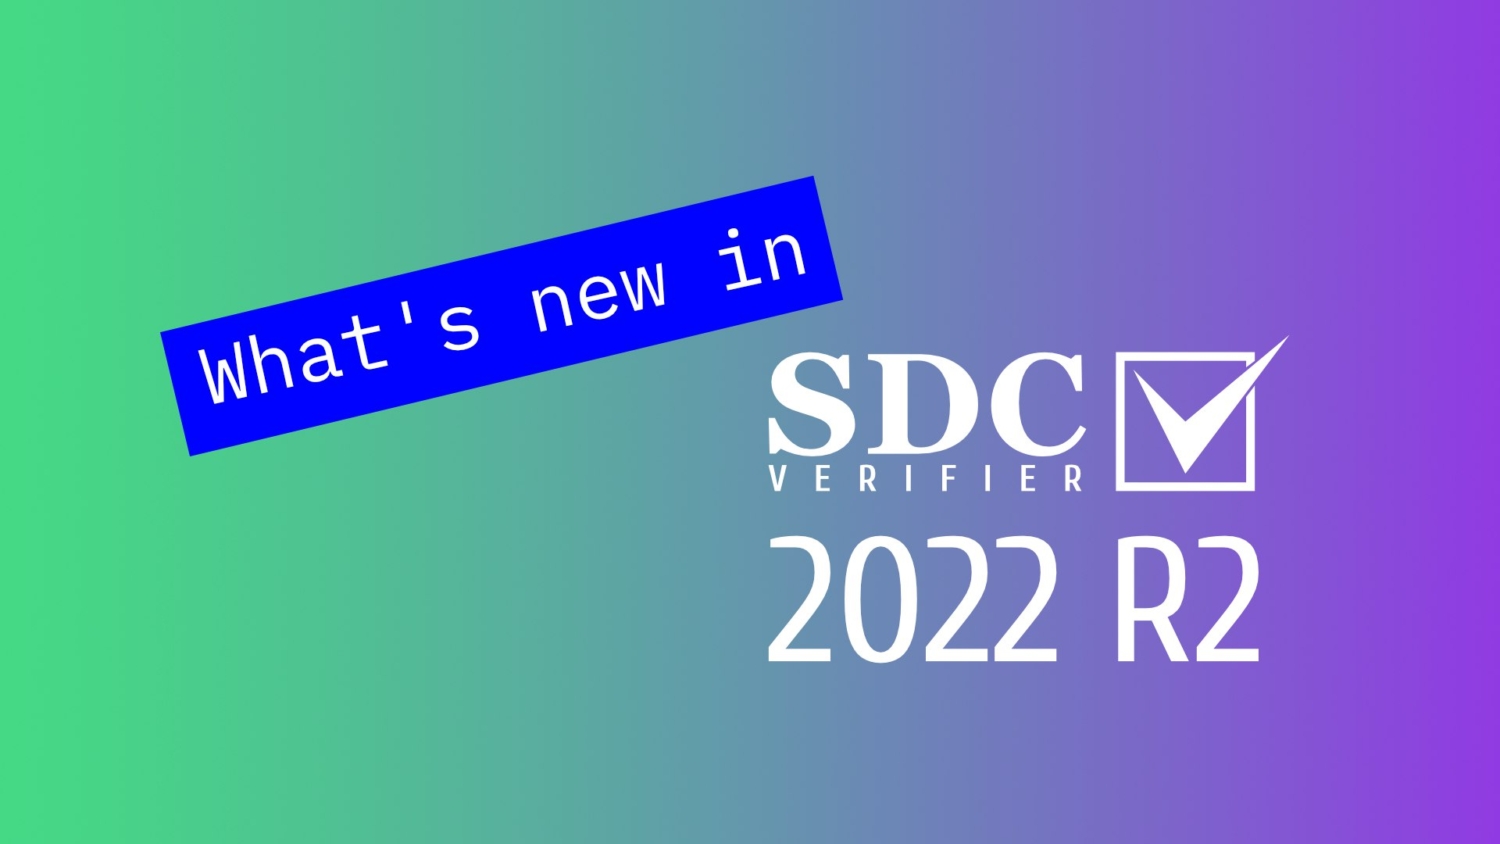 The webinar What’s new in SDC Verifier 2022 R2